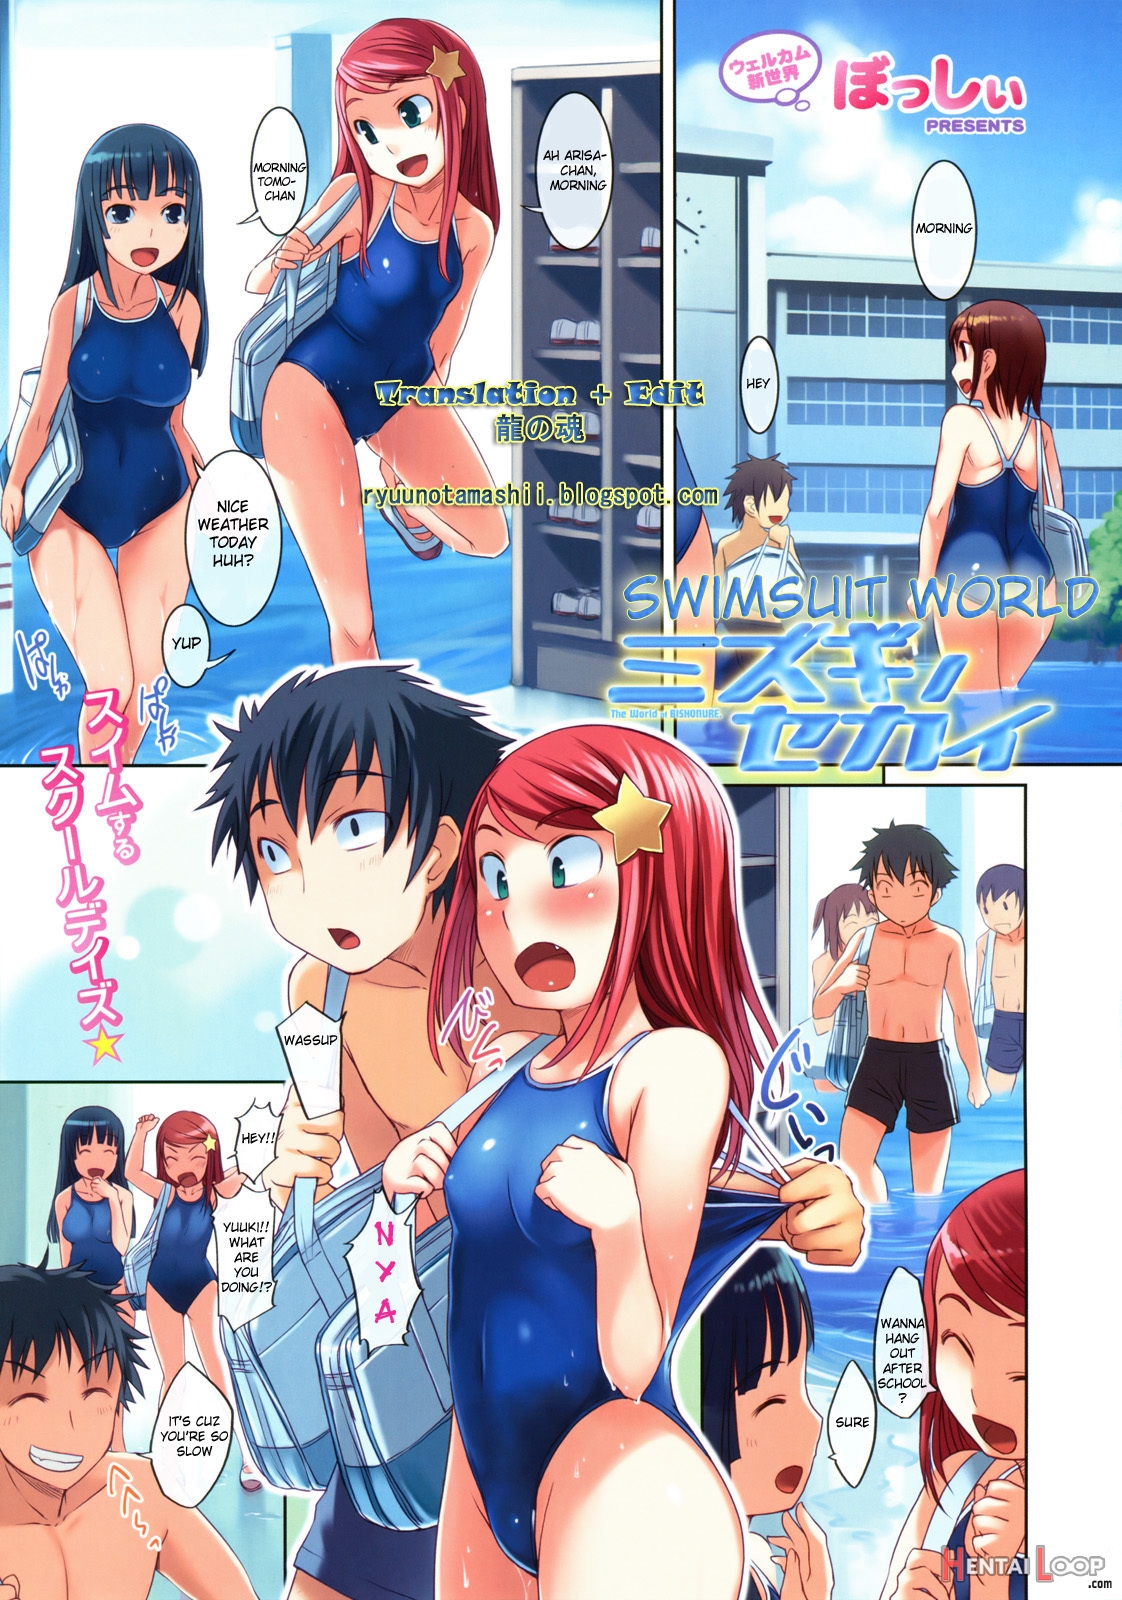 Swimsuit World page 1